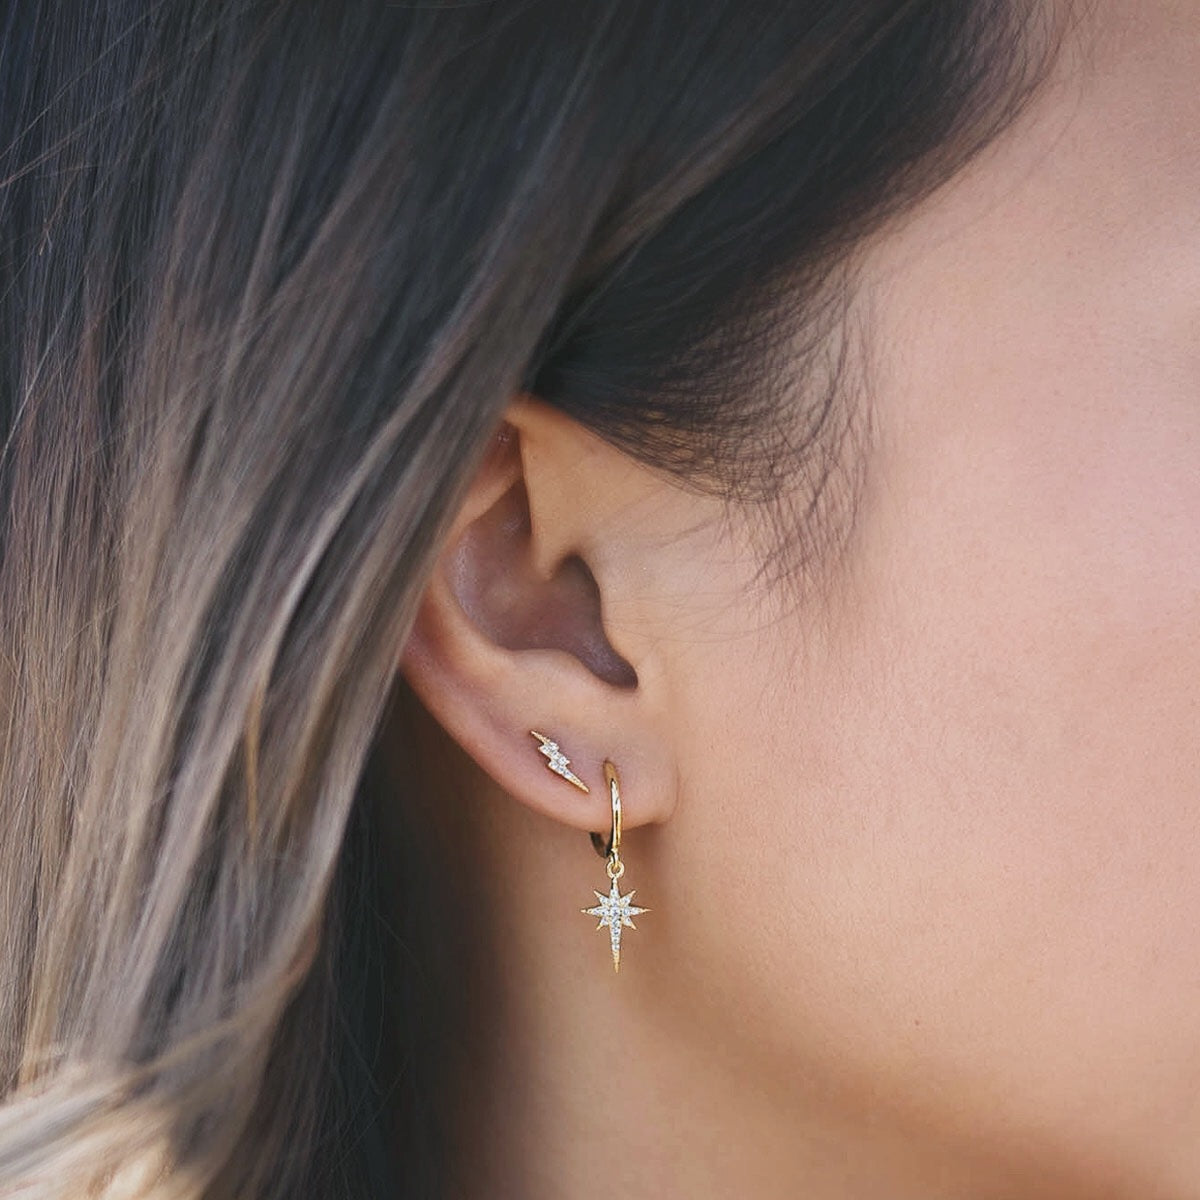 Gold Star Dangle Earring with Tiny Lightning bolt stud earring on second hole